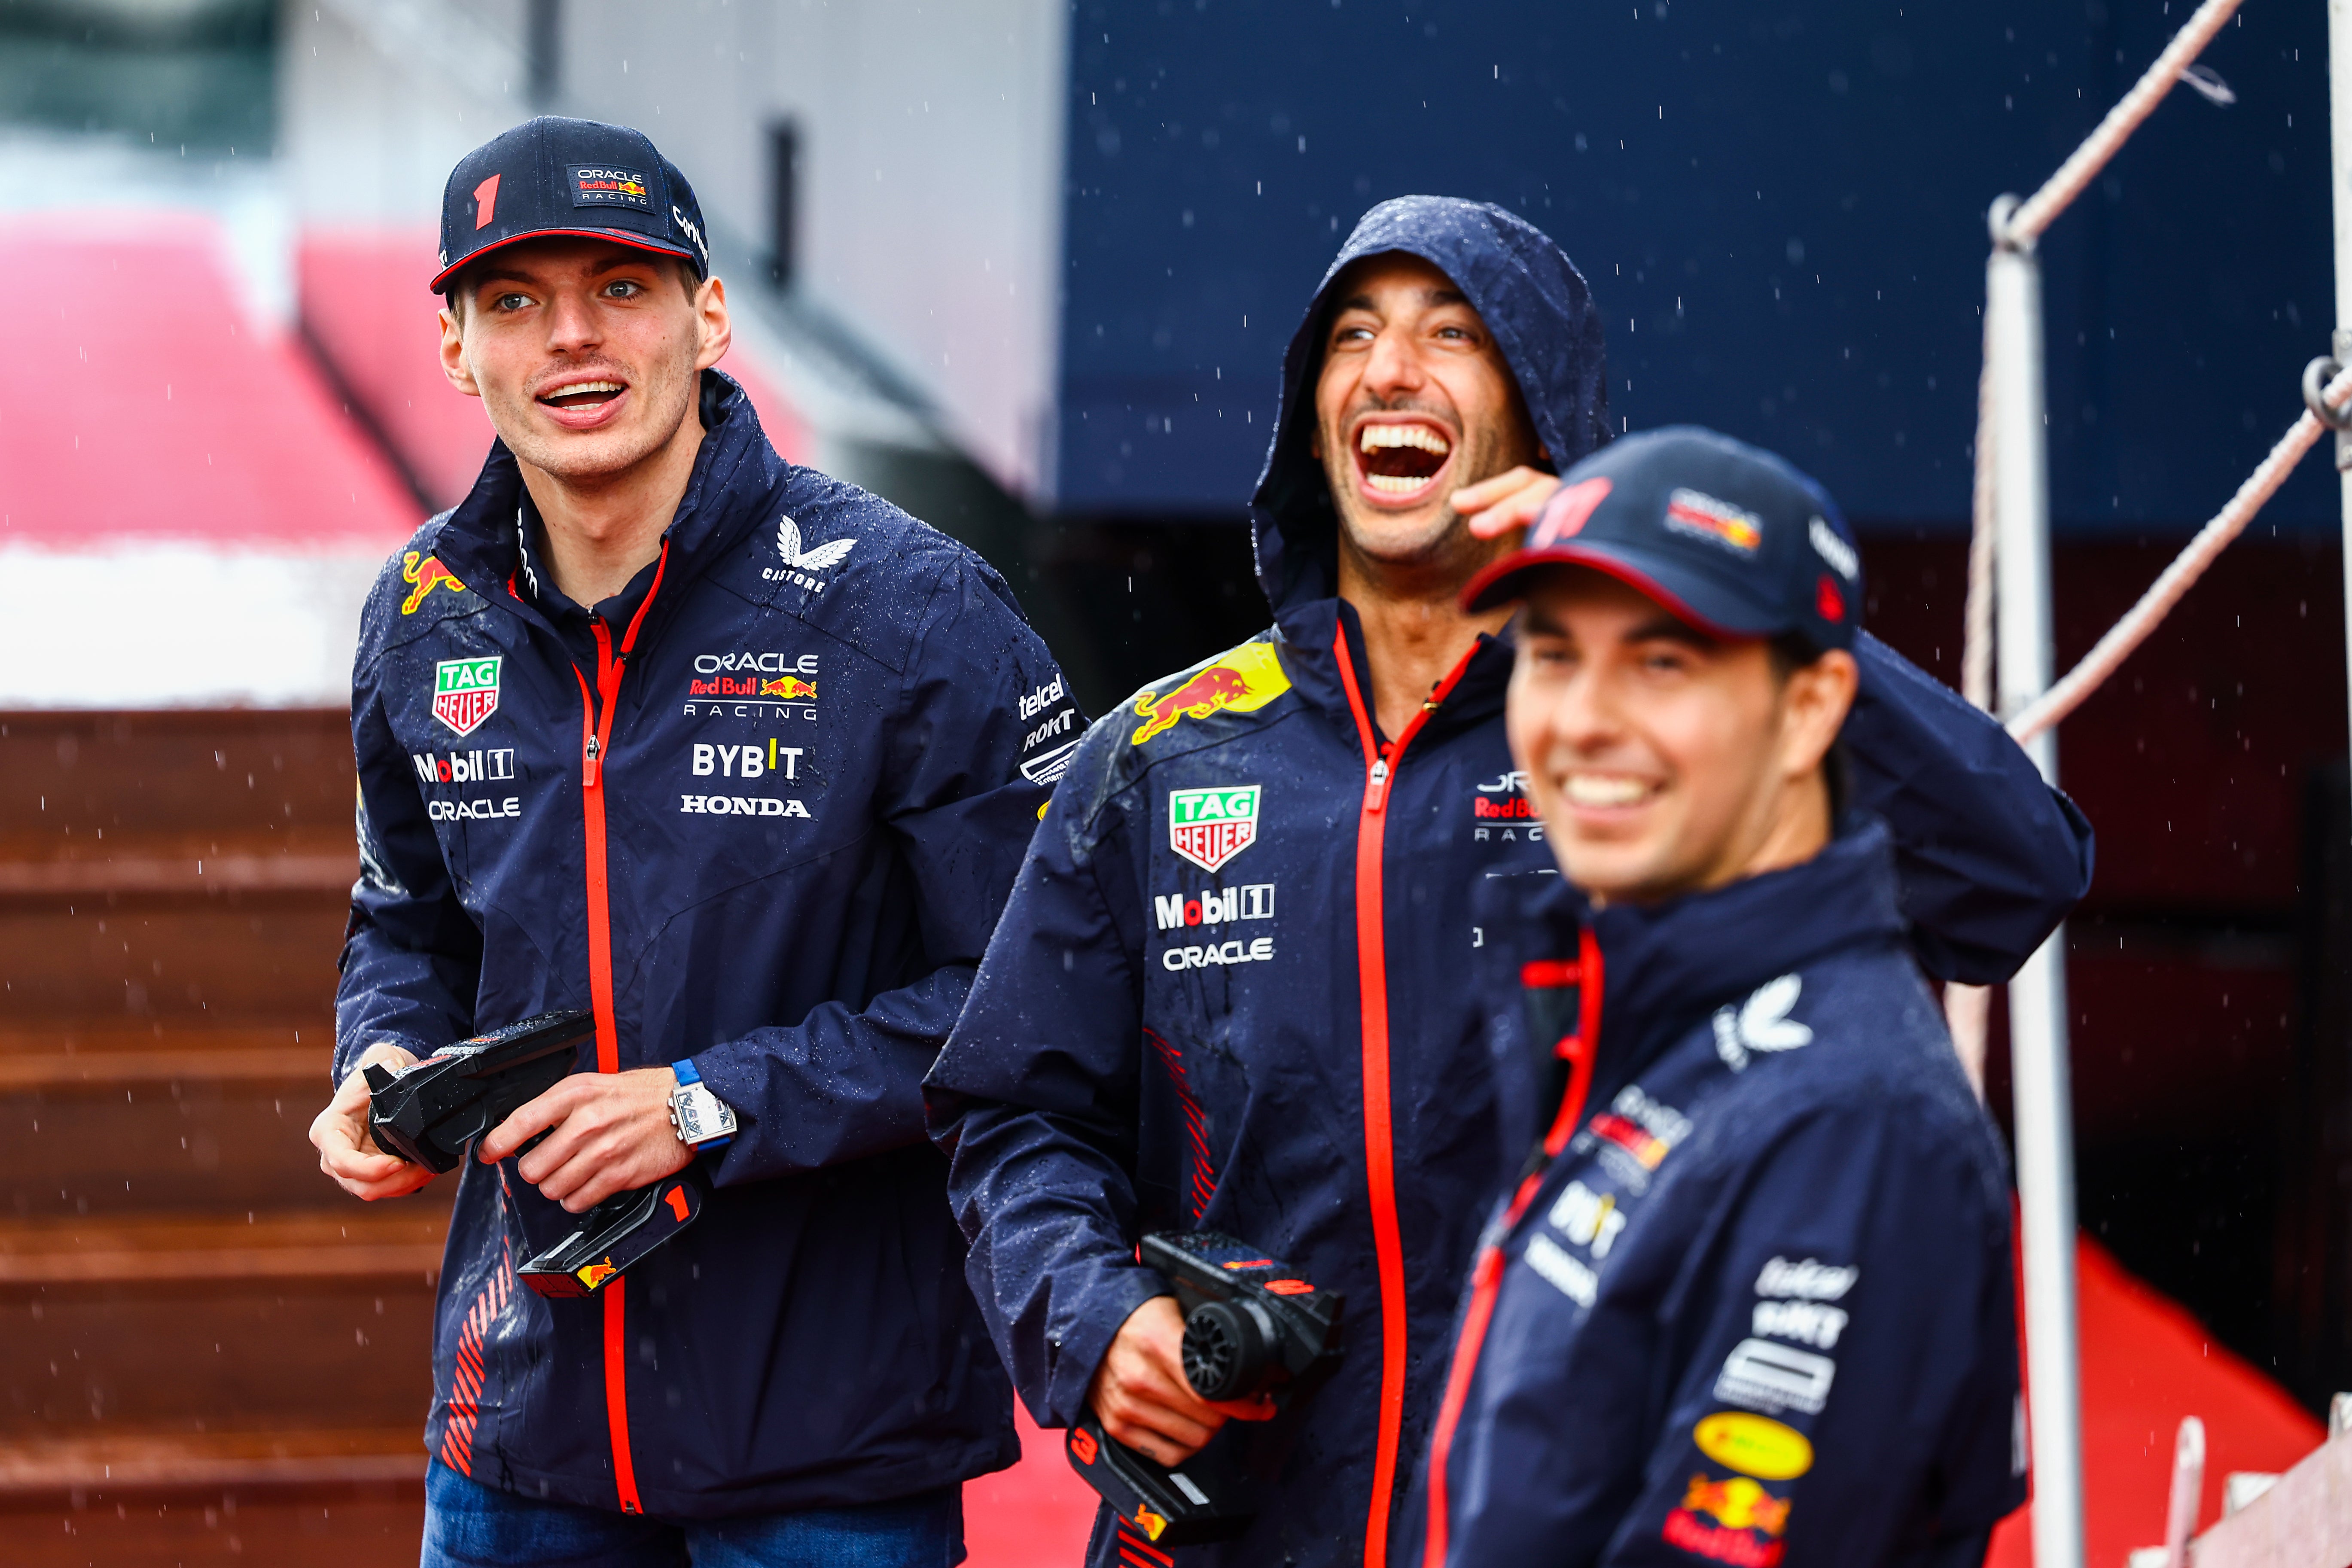 Ricciardo’s re-emergence places pressure on Sergio Perez as Max Verstappen’s teammate at Red Bull